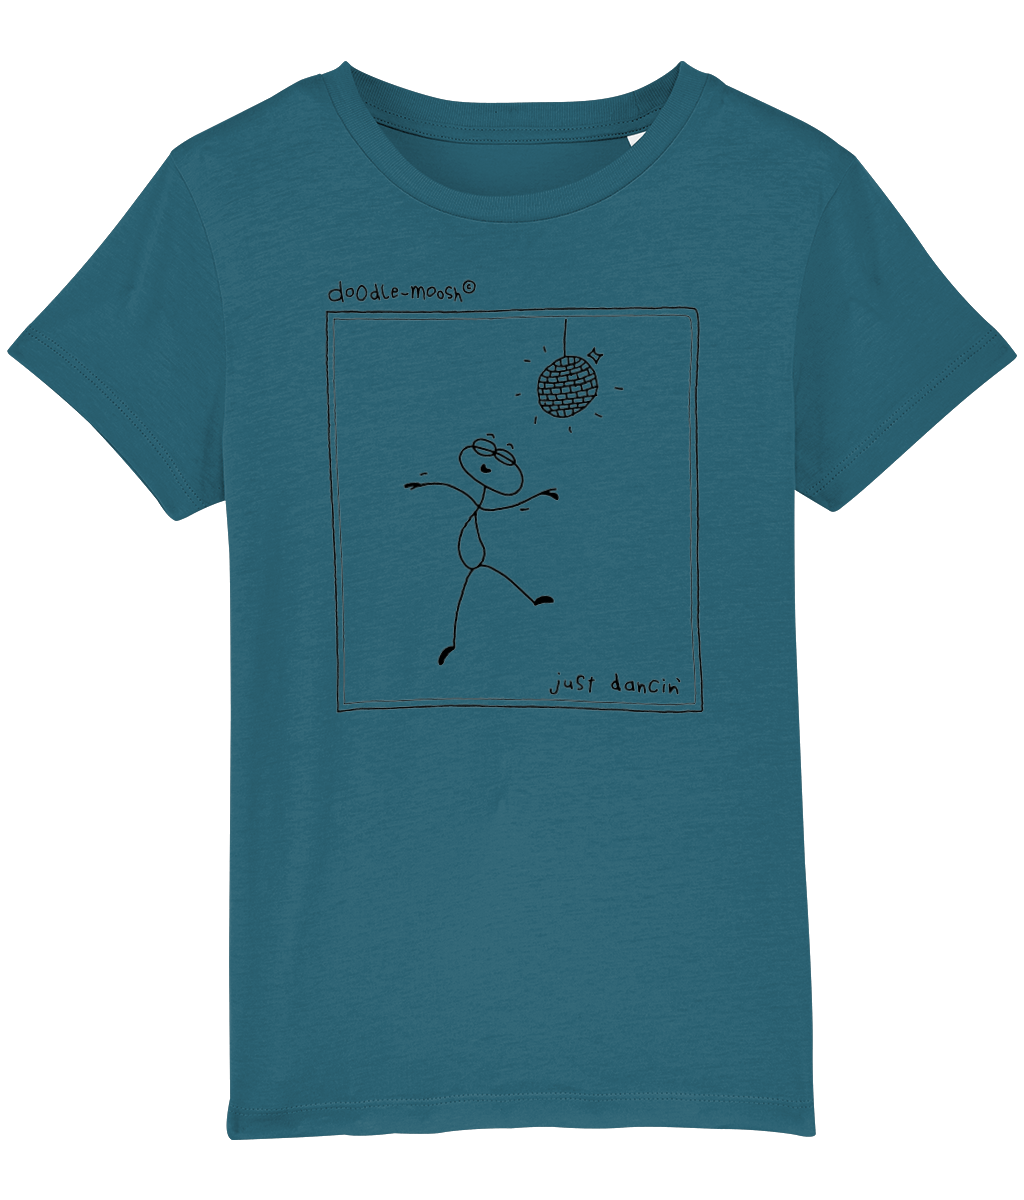 Just dancing t-shirt, blue with black